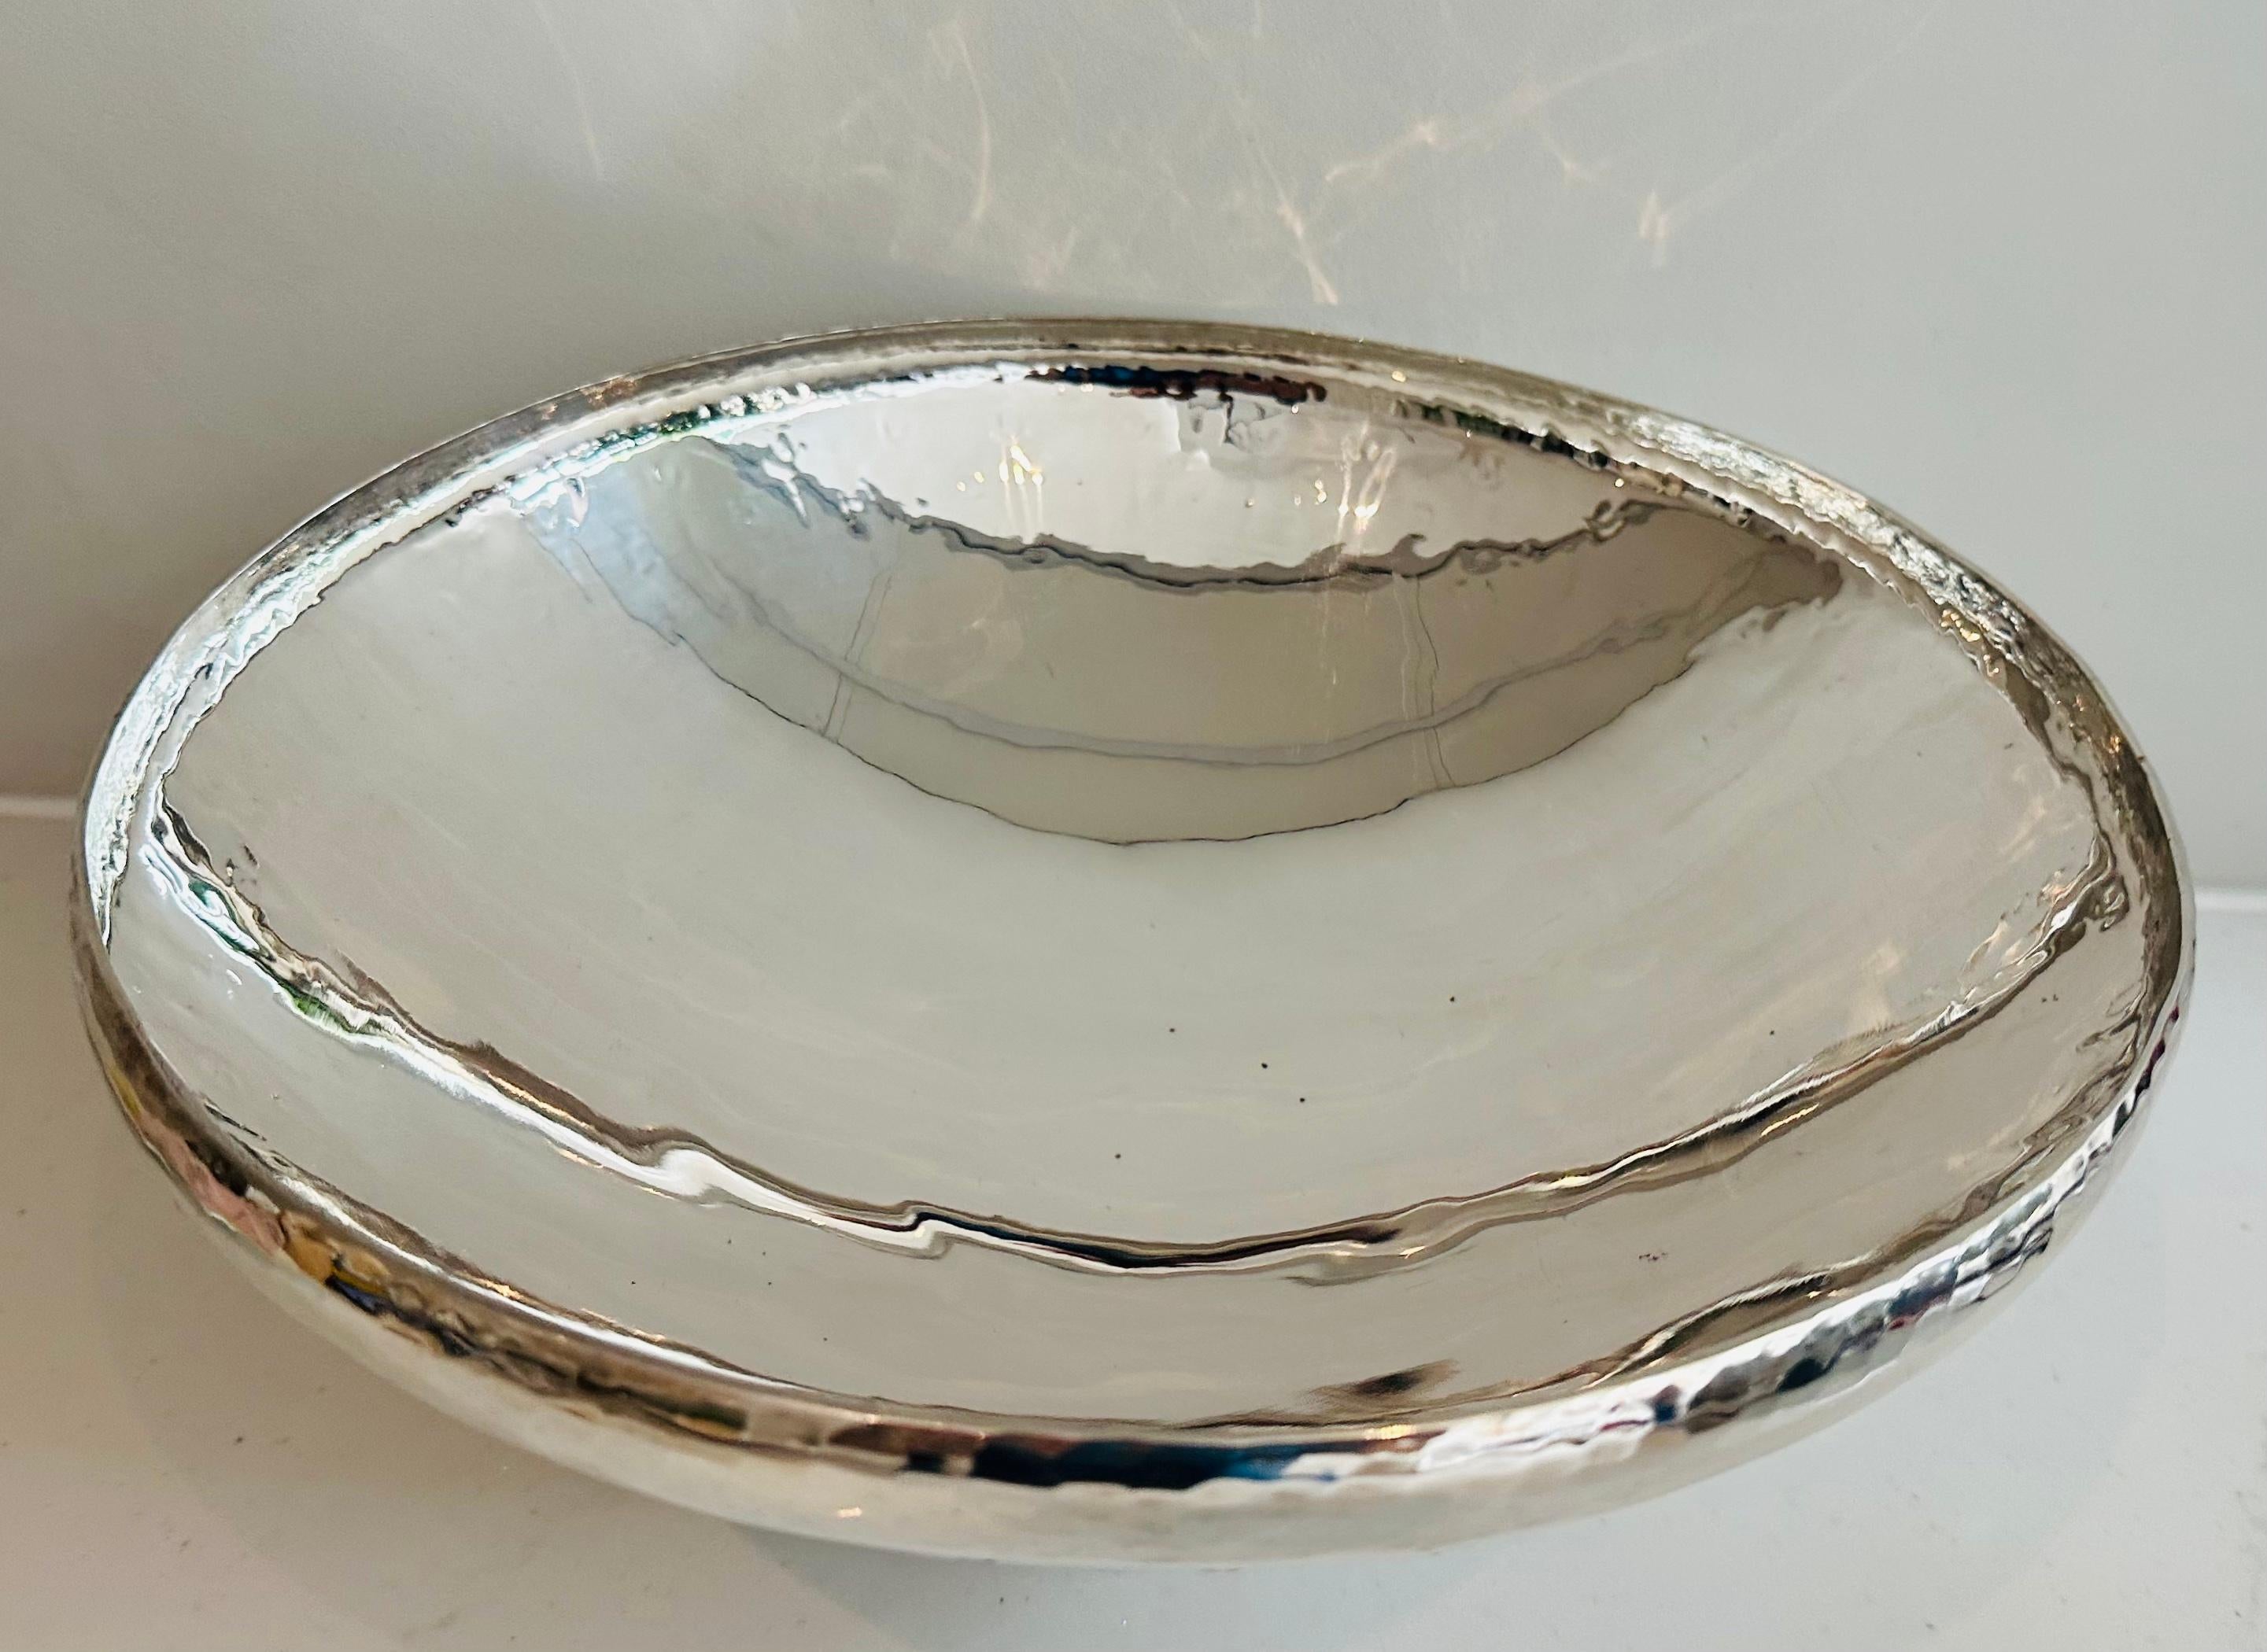 1980s English Silver Plated Decorative Hand-Hammered Serving or Display Bowl 6